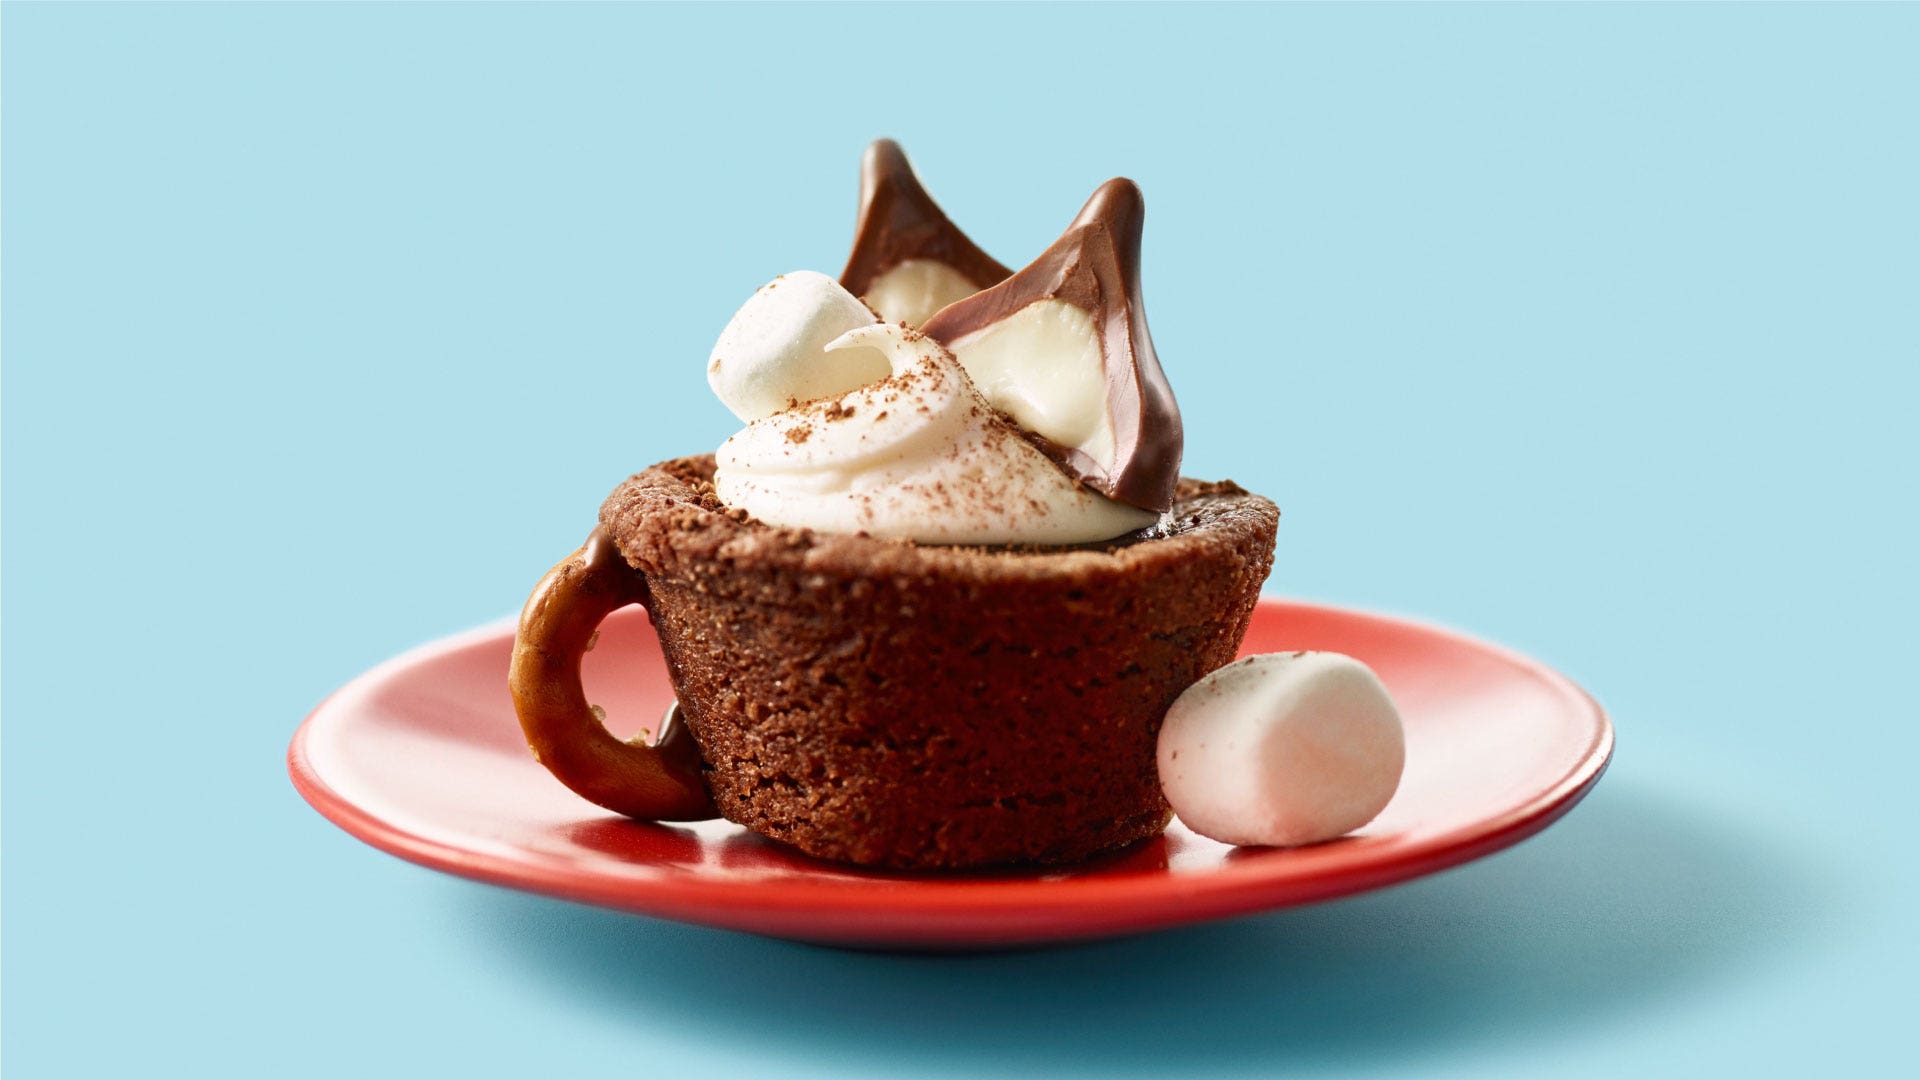 hot cocoa cookie cups